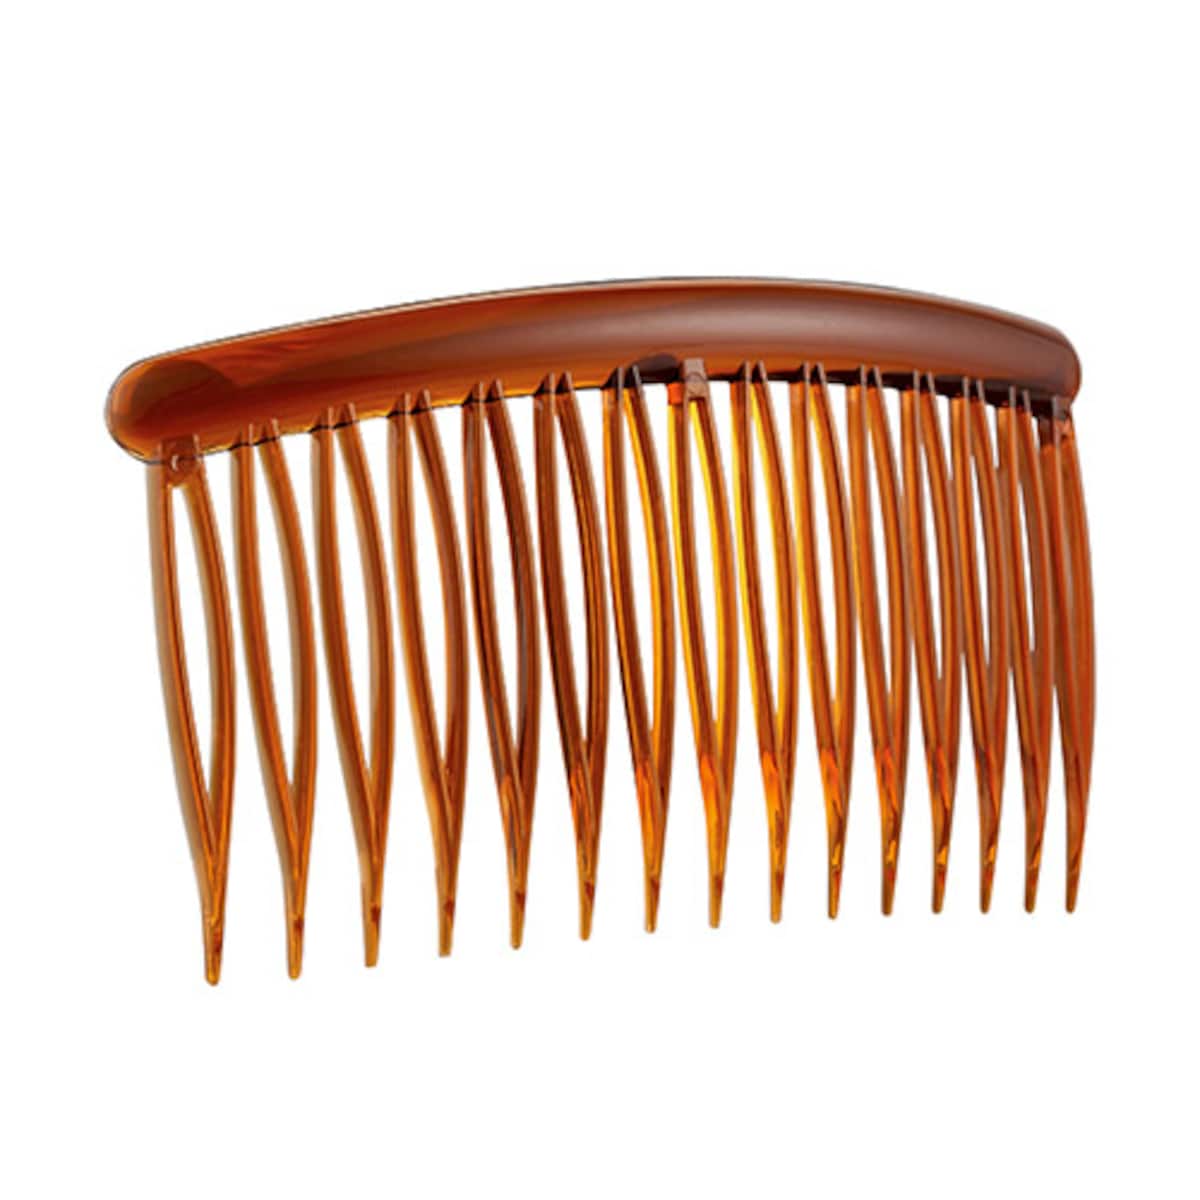 Lady Jayne Side Comb Shell 4 Pack